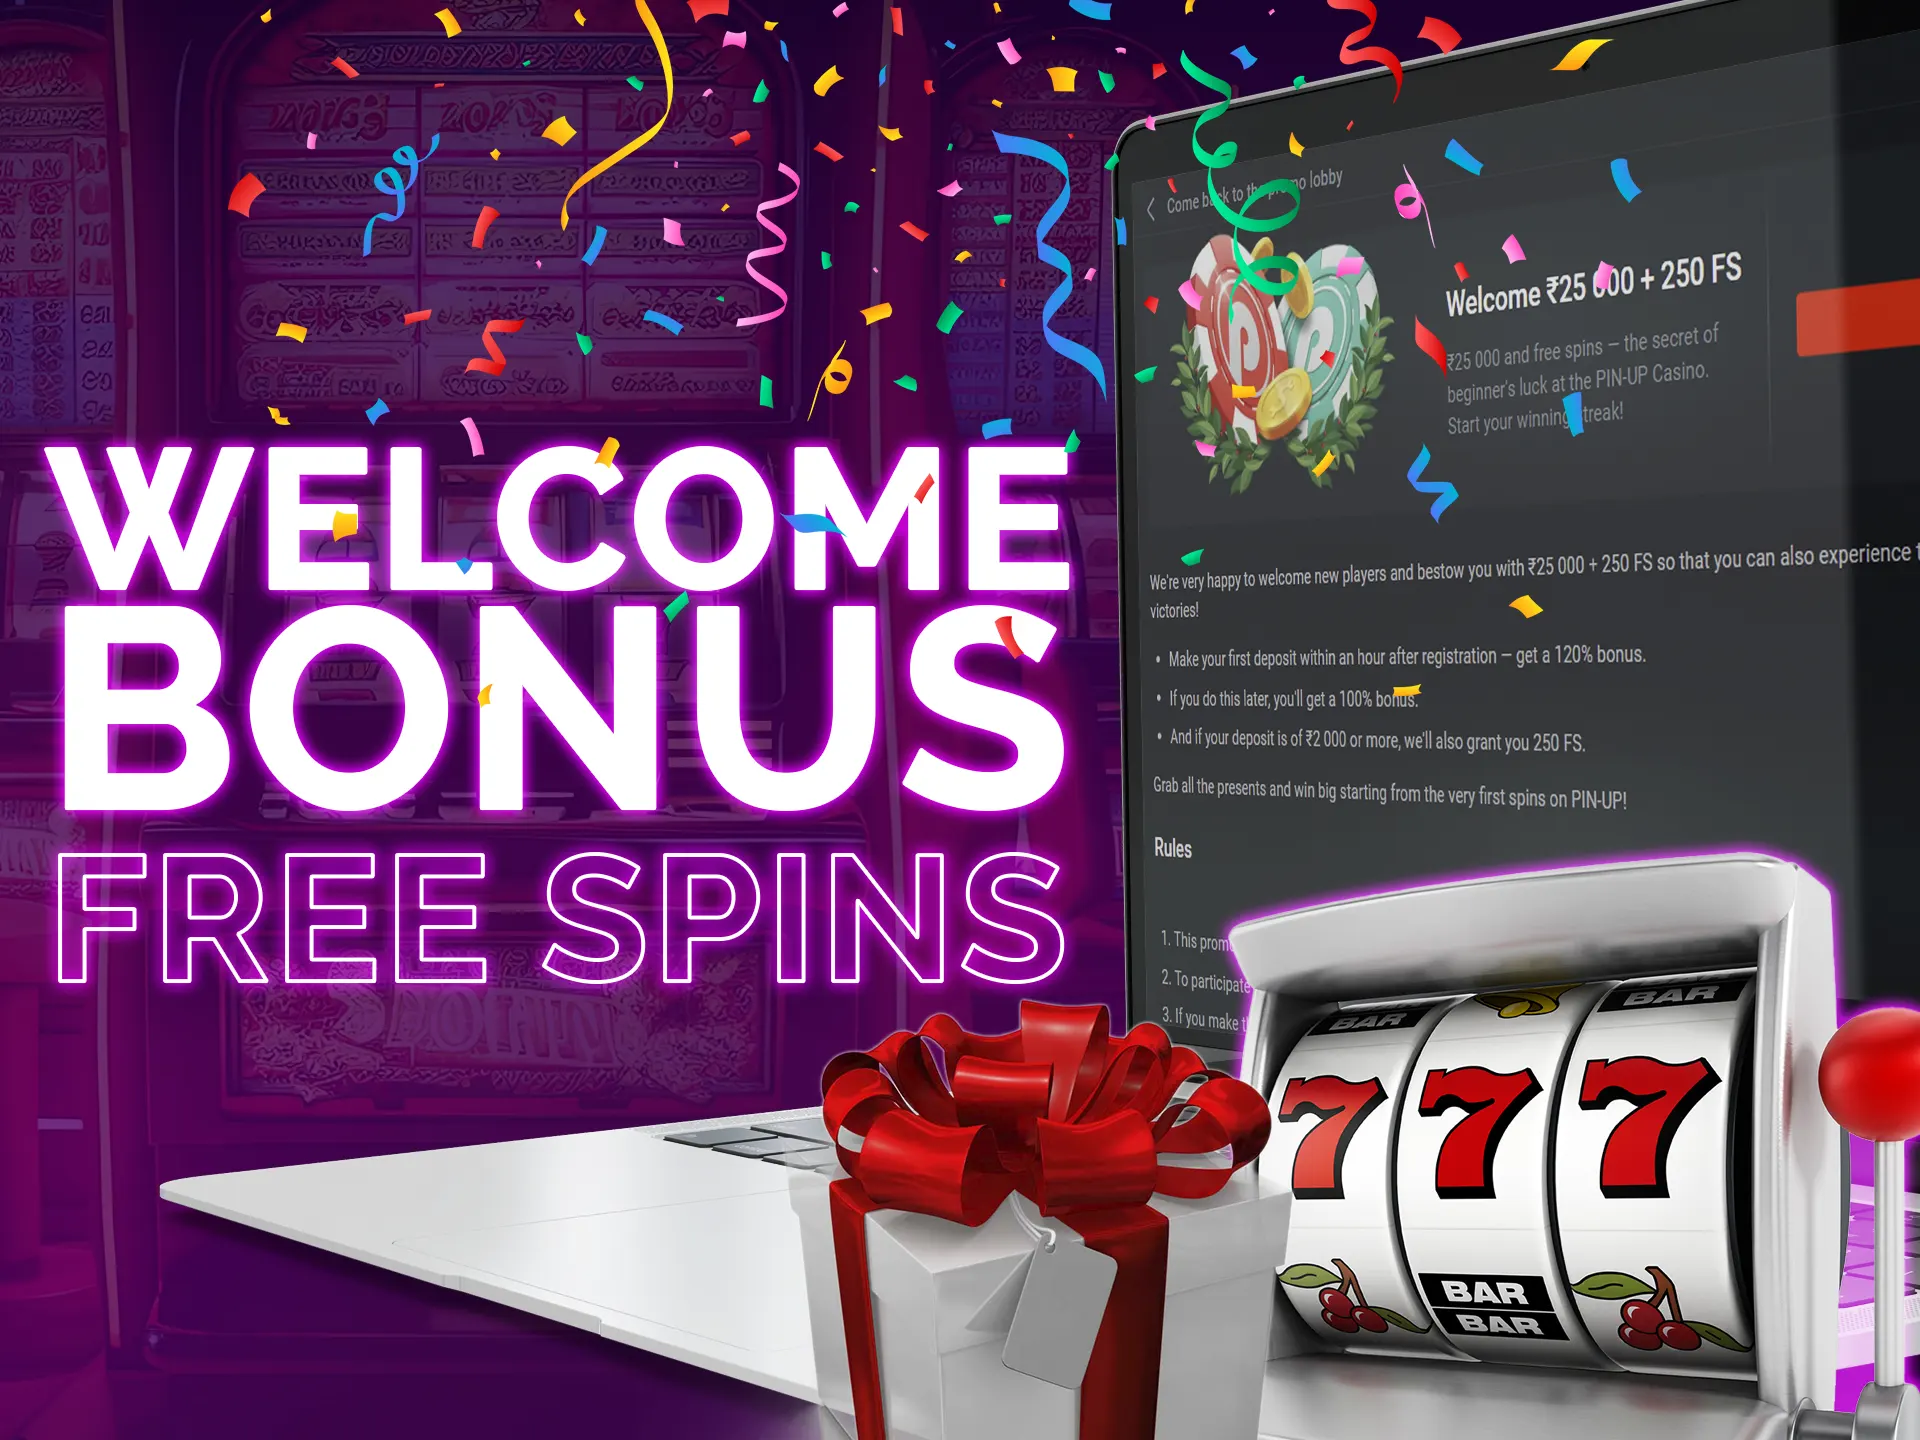 Additional way to get free spins - to get it with welcome bonus.